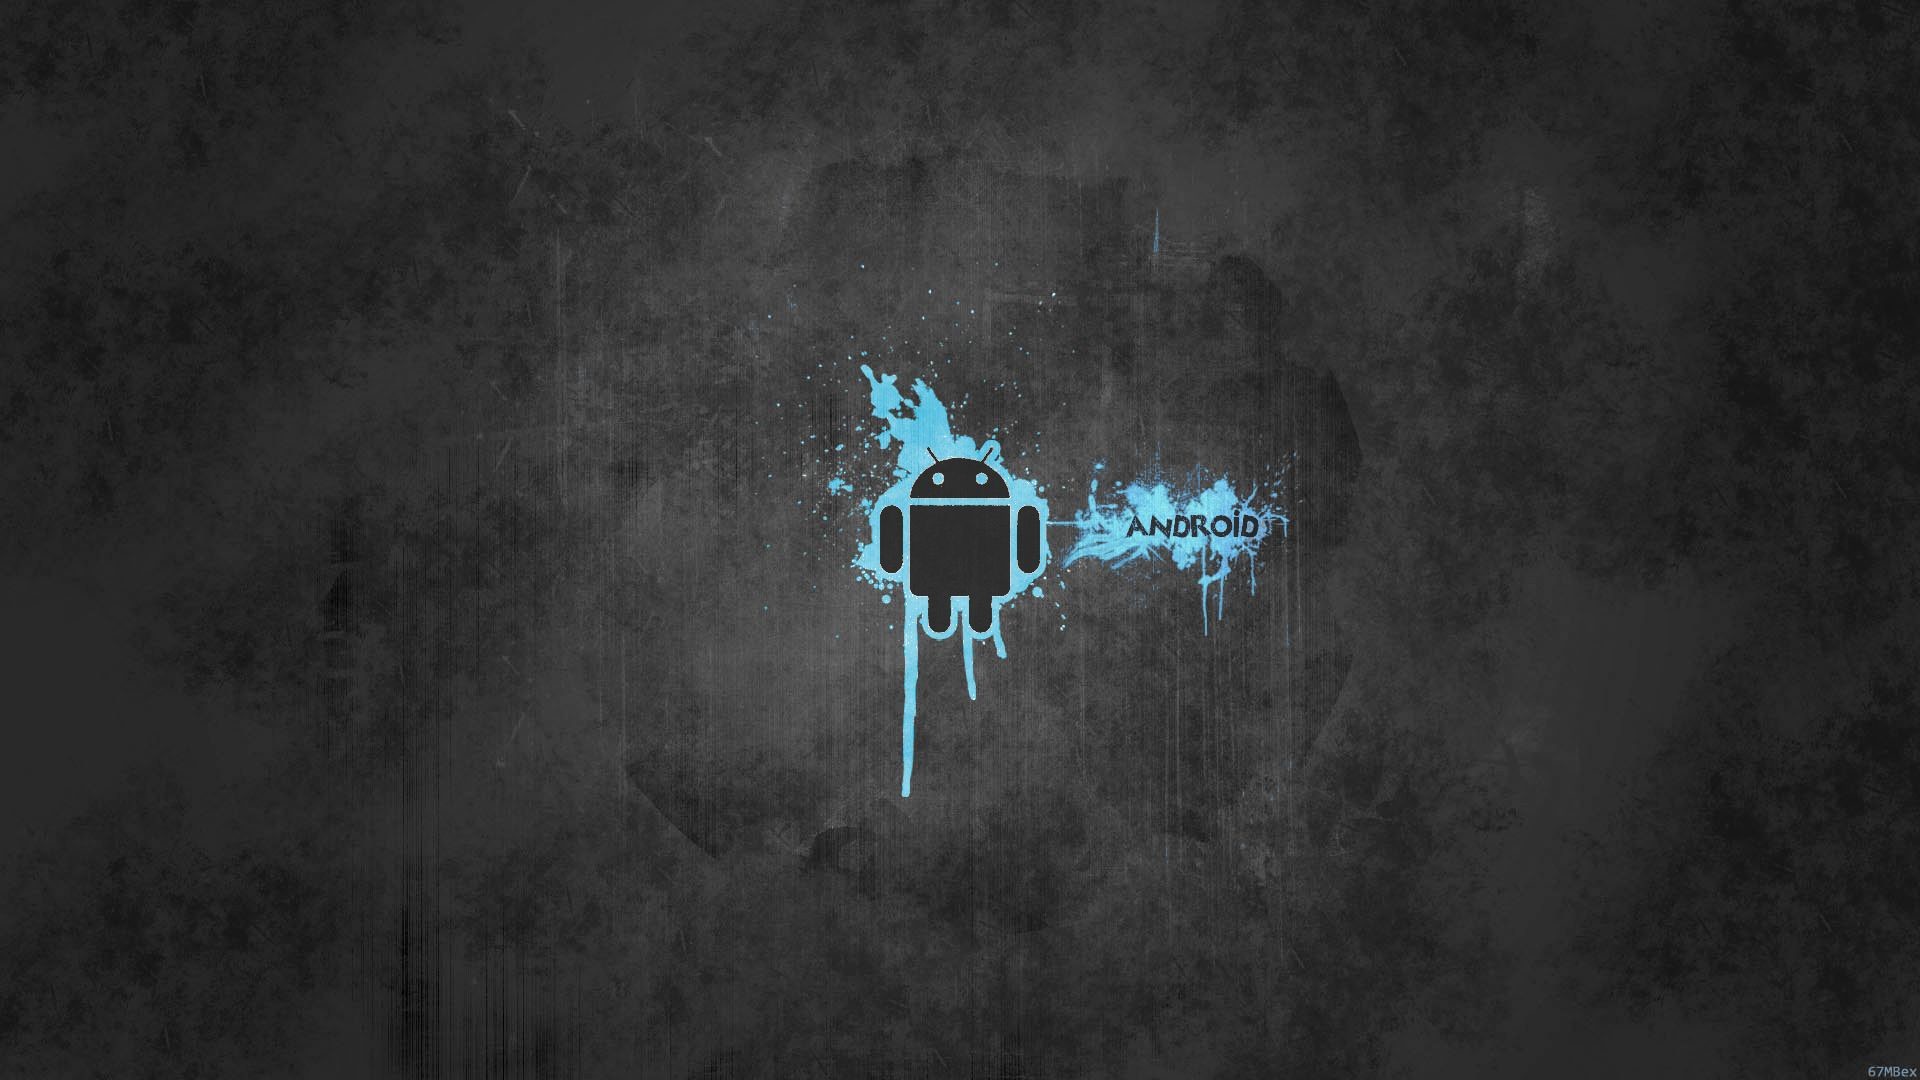 1920x1080 Simple Blue Android HD Image Wallpaper | WallpaperLepi